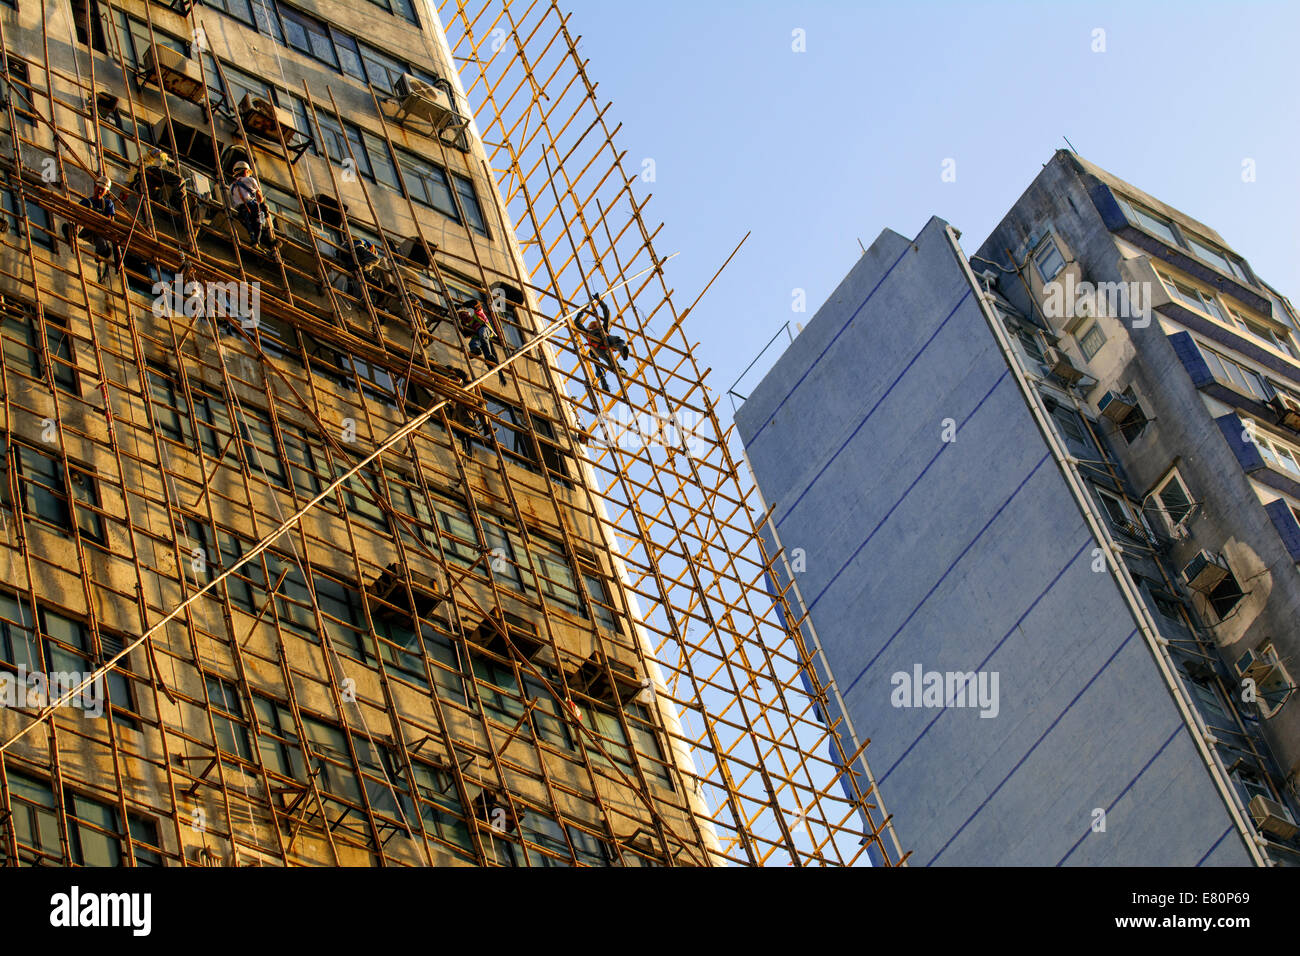 Chinese construction workers on bamboo scaffolding, Hong Kong, China. Stock Photo